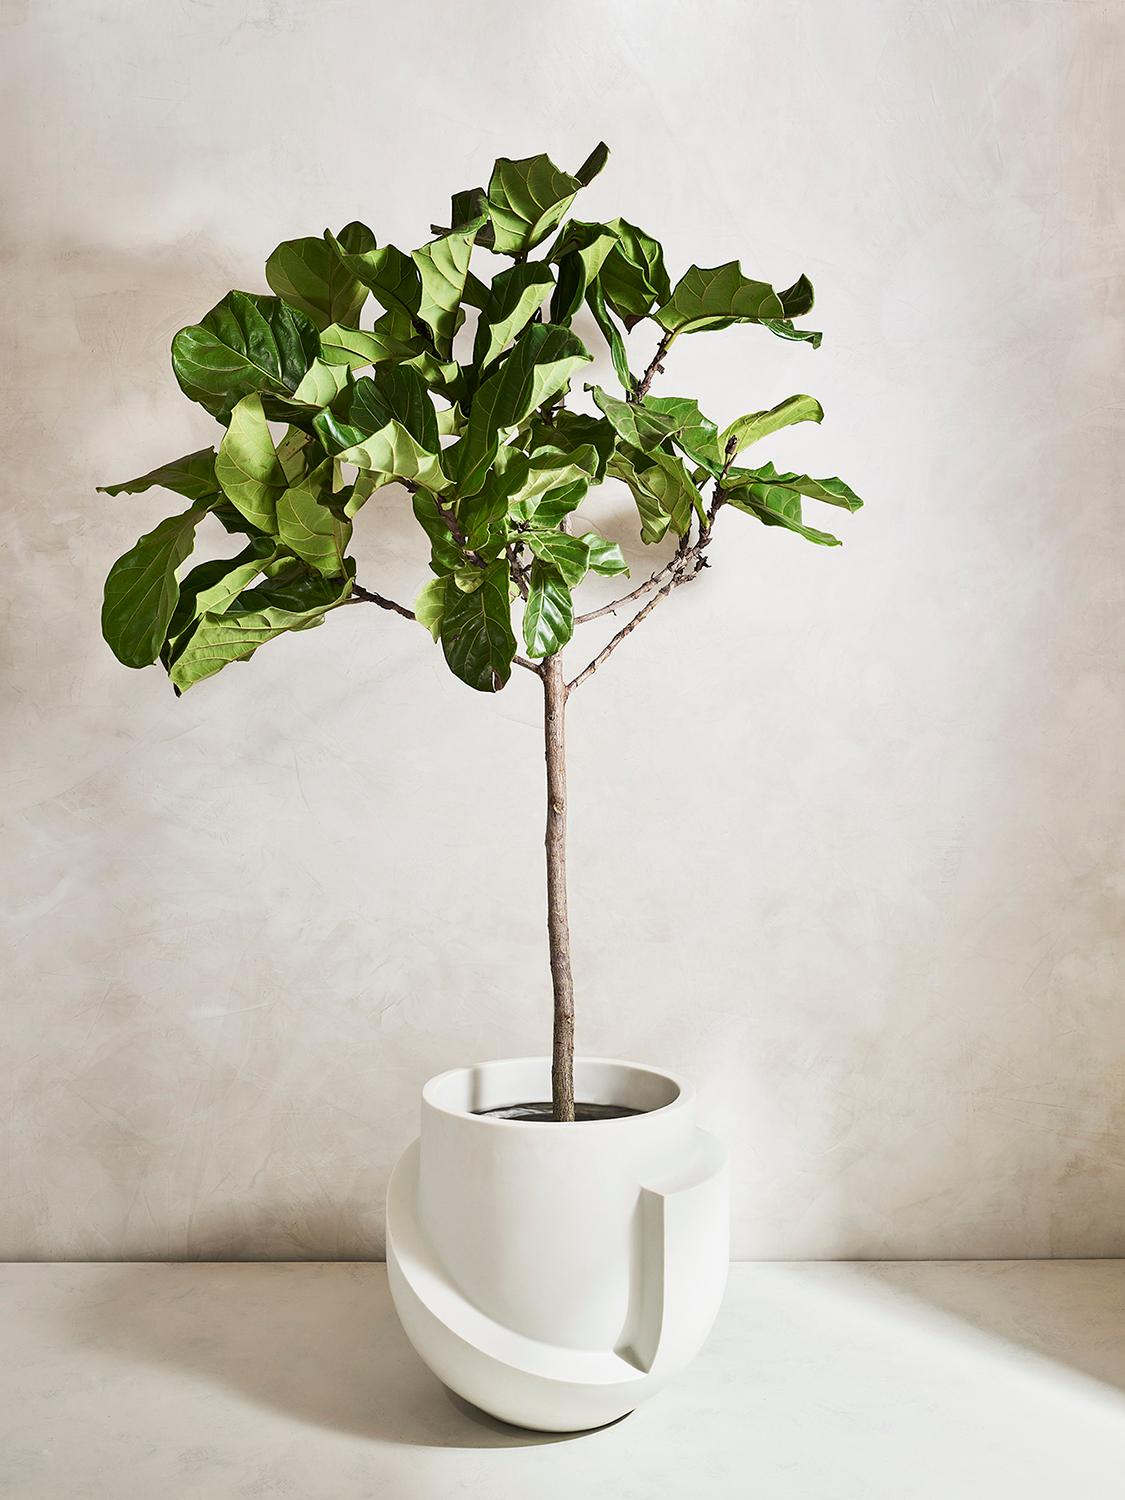 Large Bonded Marble floor planter in smooth satin finish

This generously sized planter is realized in a very indestructible bonded Carrara Marble. Suitable for indoor or outdoor. Option for a drainage hole or no hole for indoor use.

Vessel